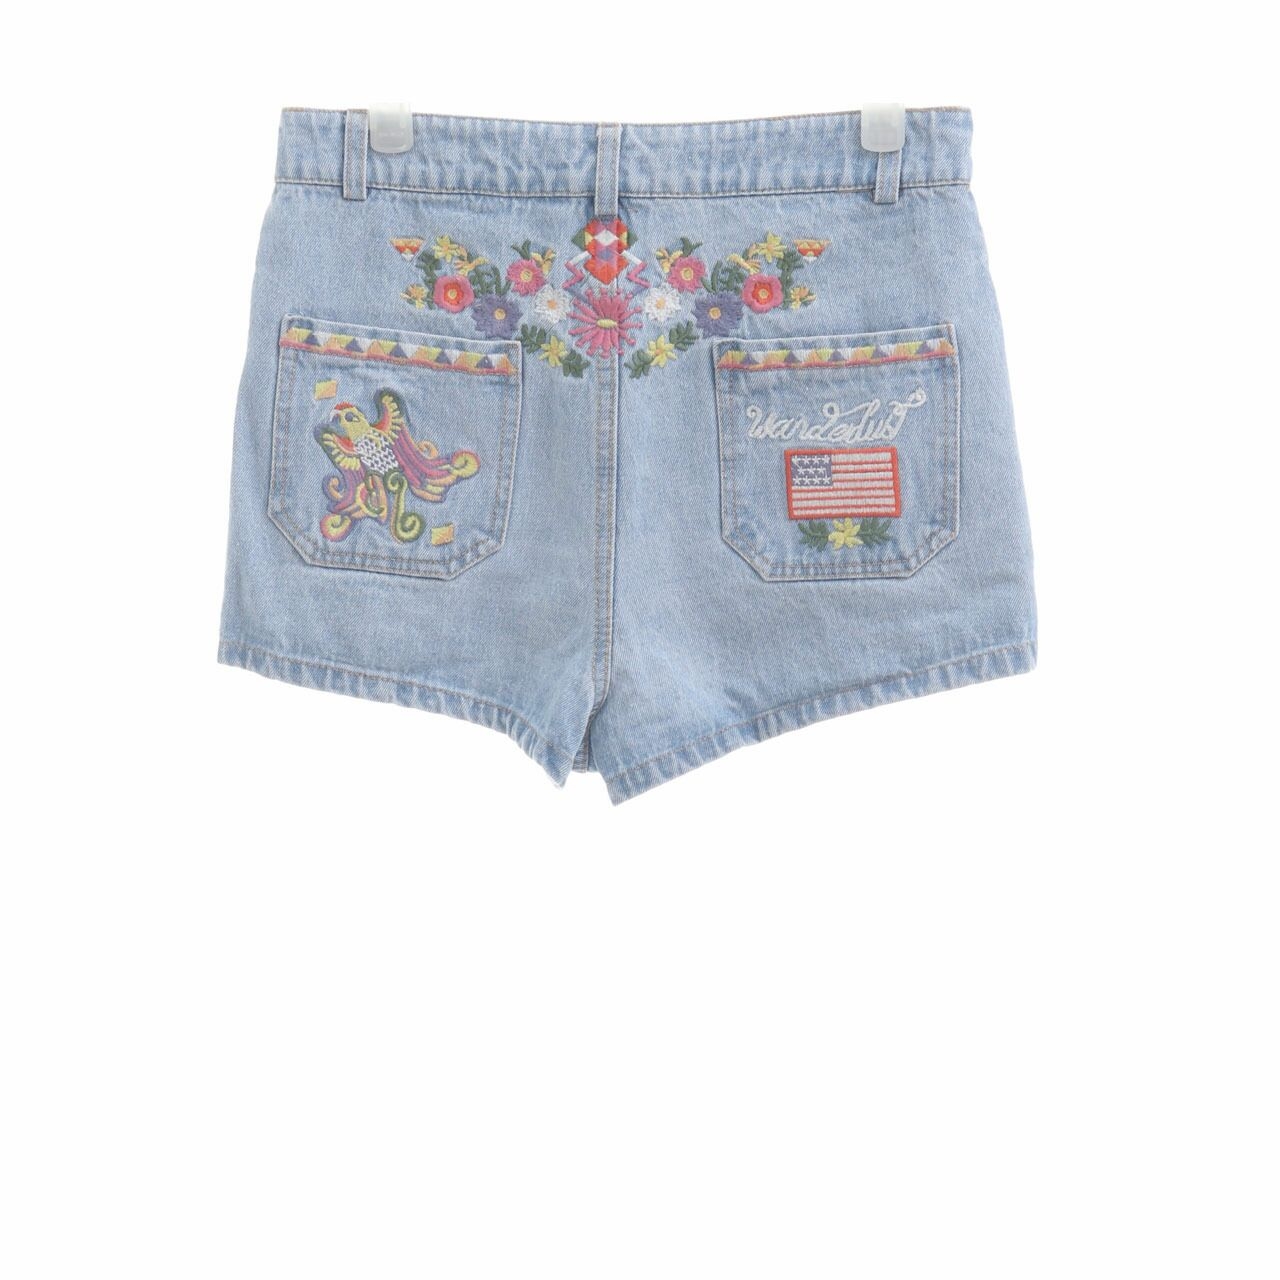 Free People Home Made Blue Embroidery Denim Shorts Pants